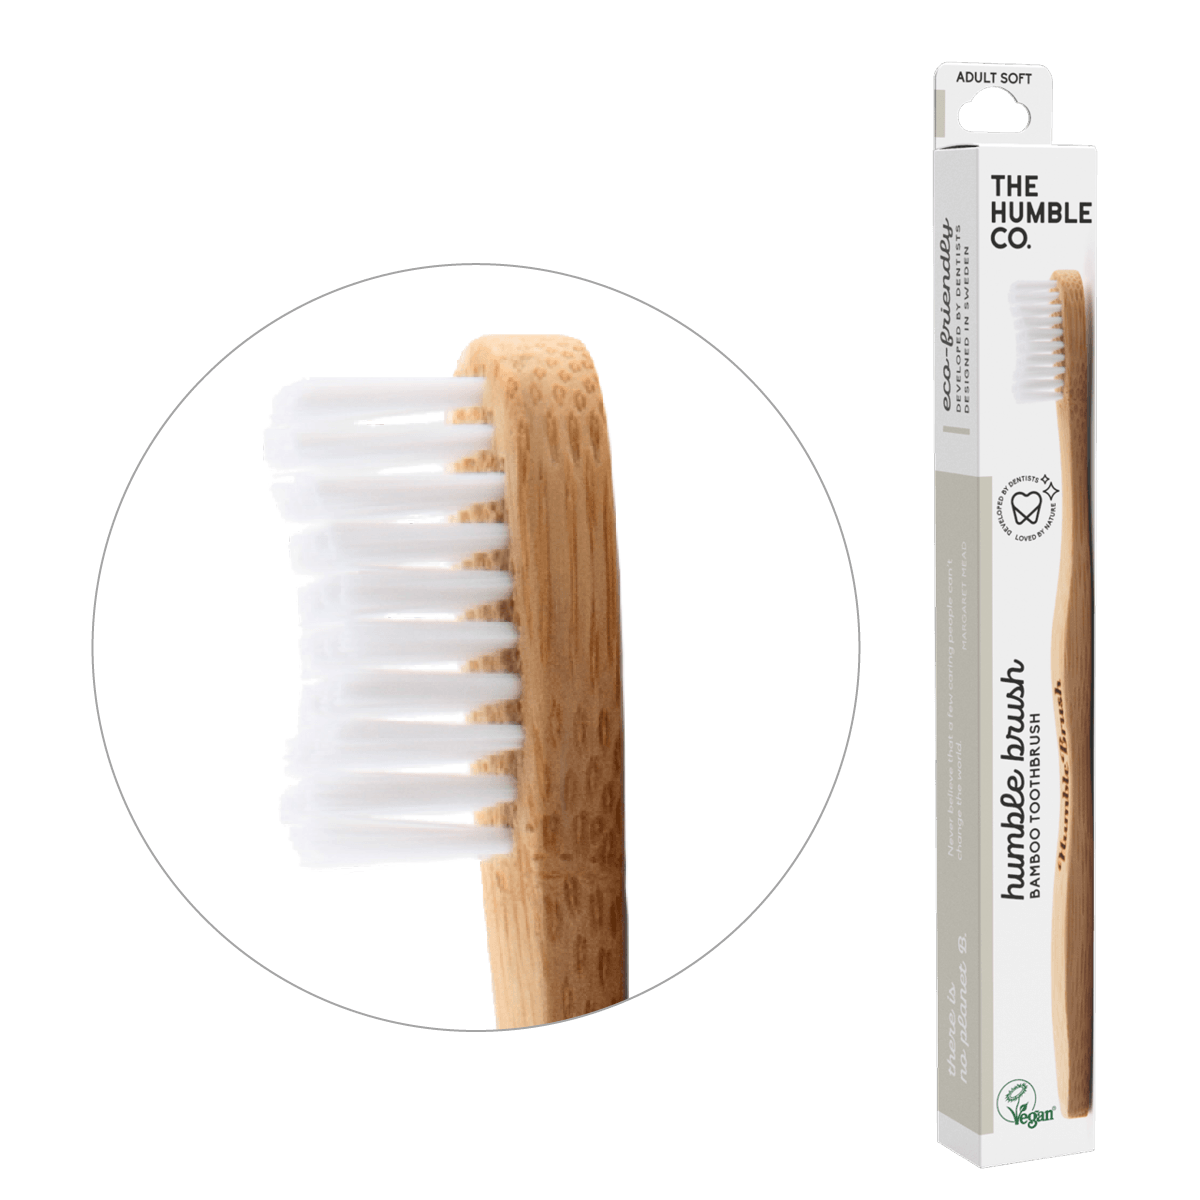 The Humble Co. white Adult Soft Toothbrush